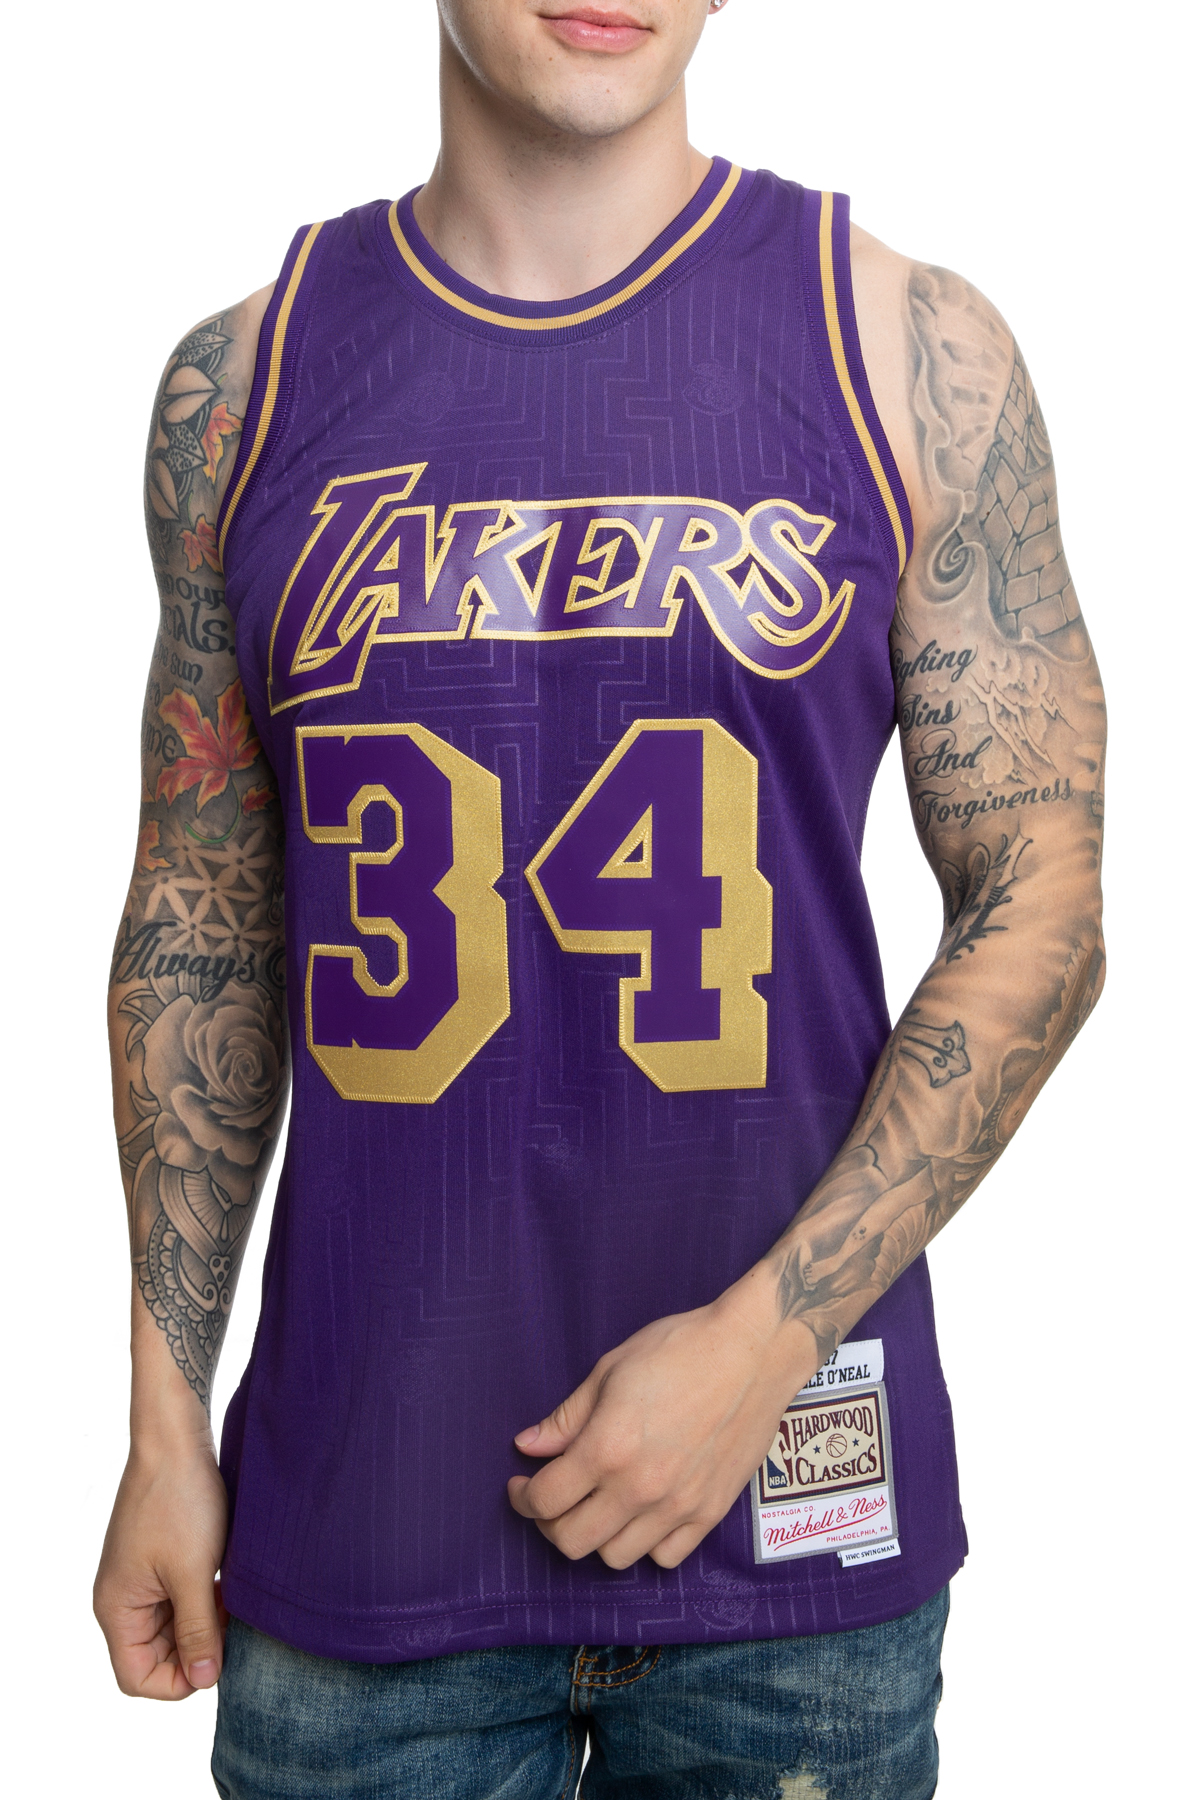 Boys Shaquille O'Neal NBA Jerseys for sale